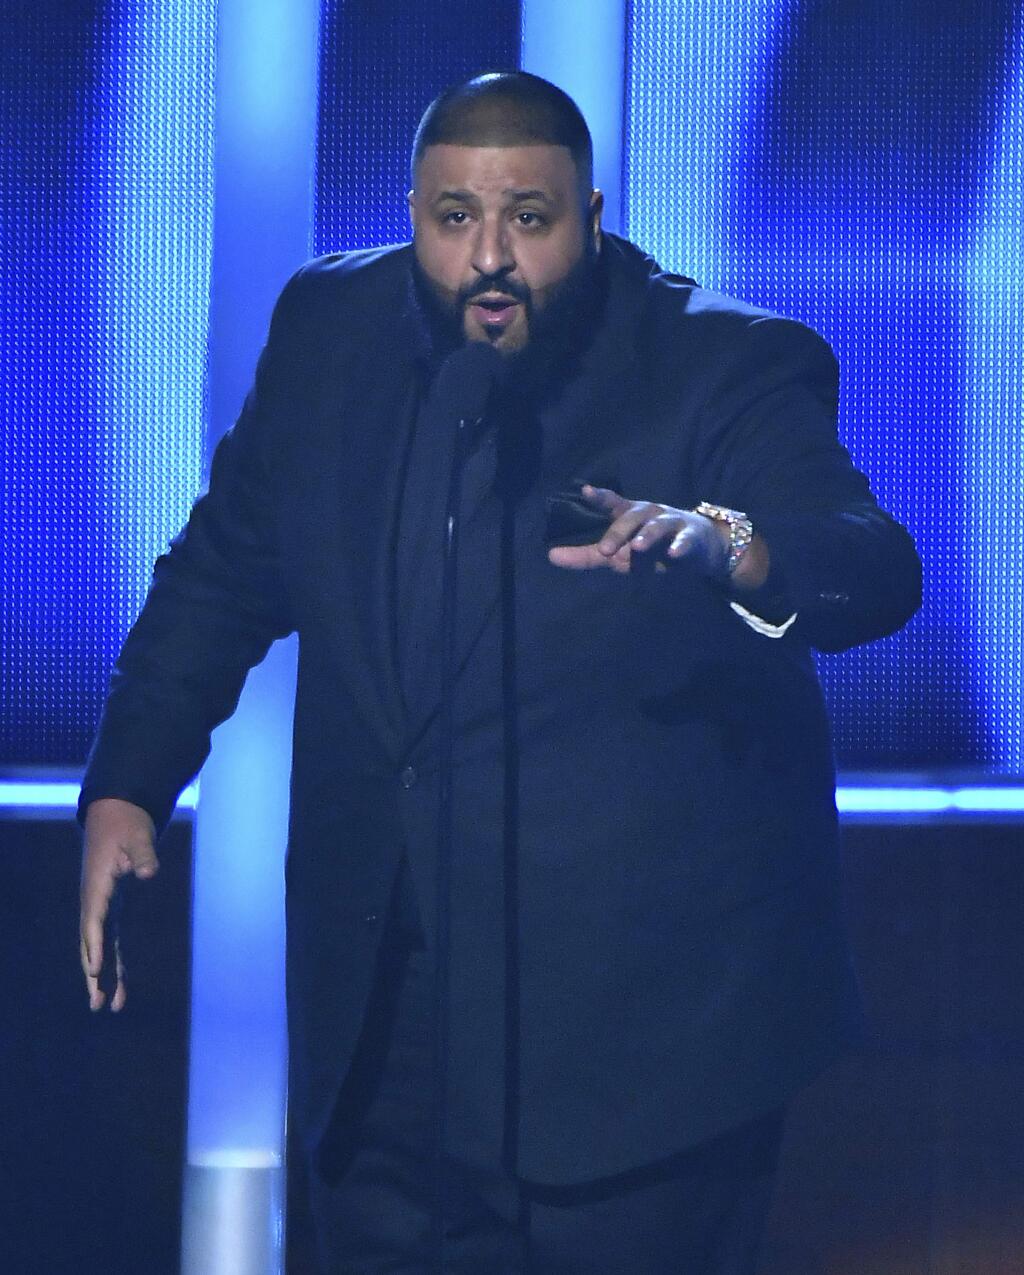 DJ Khaled introduces a performance by Fifth Harmony at the People's Choice Awards at the Microsoft Theater on Wednesday, Jan. 18, 2017, in Los Angeles. (Photo by Vince Bucci/Invision/AP)